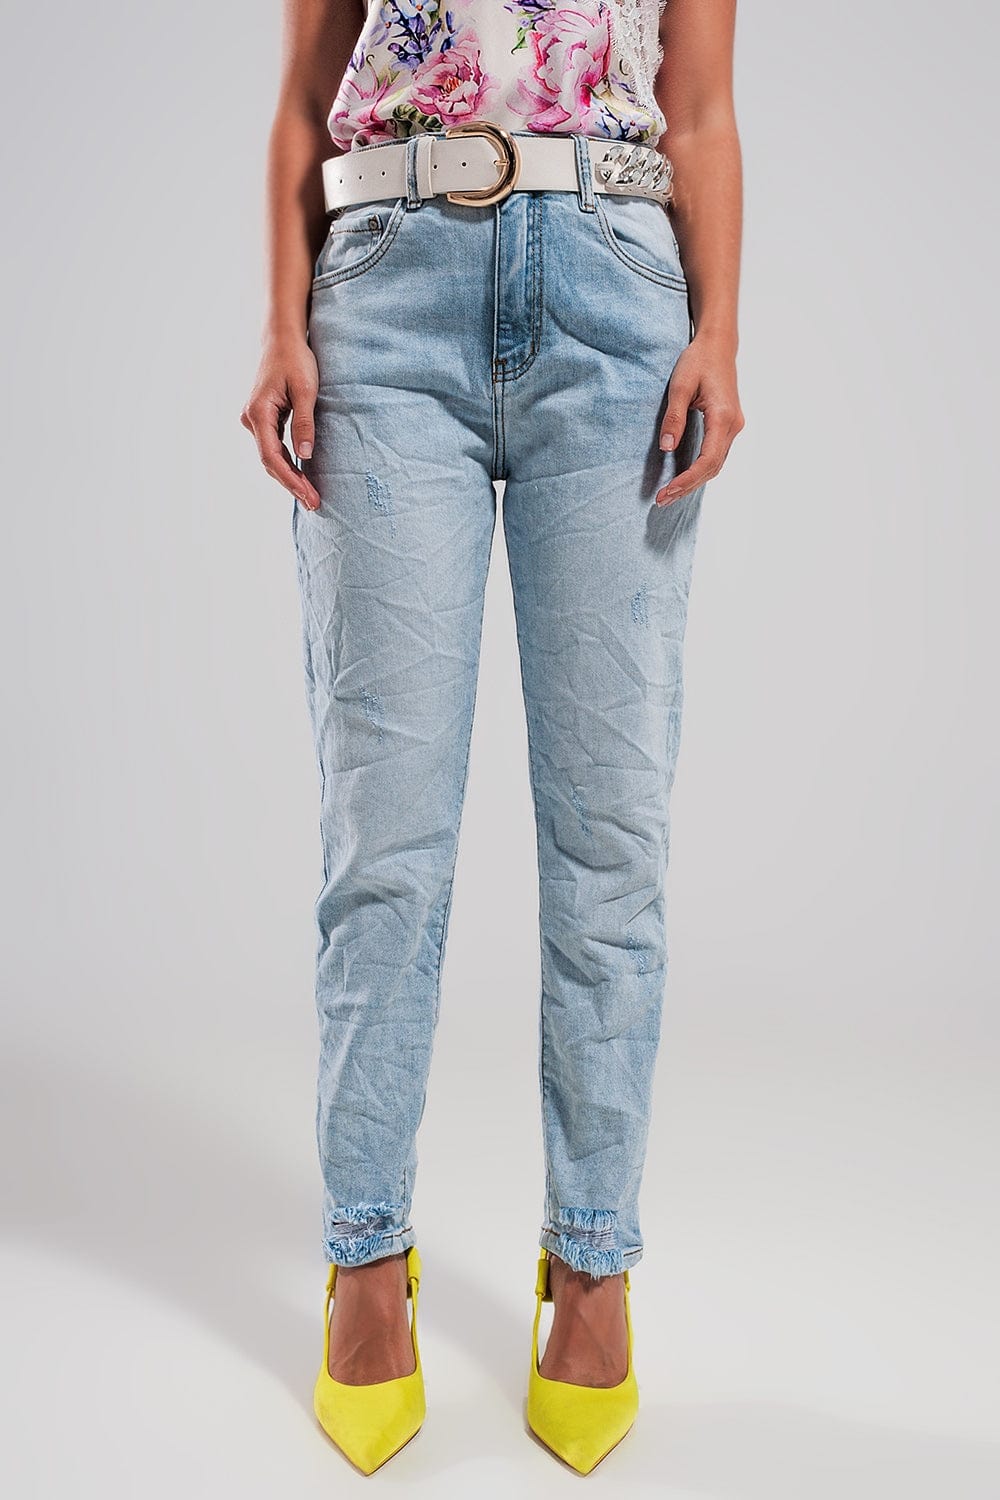 Q2 Women's Jean High Waisted Ripped Jeans in Light Blue